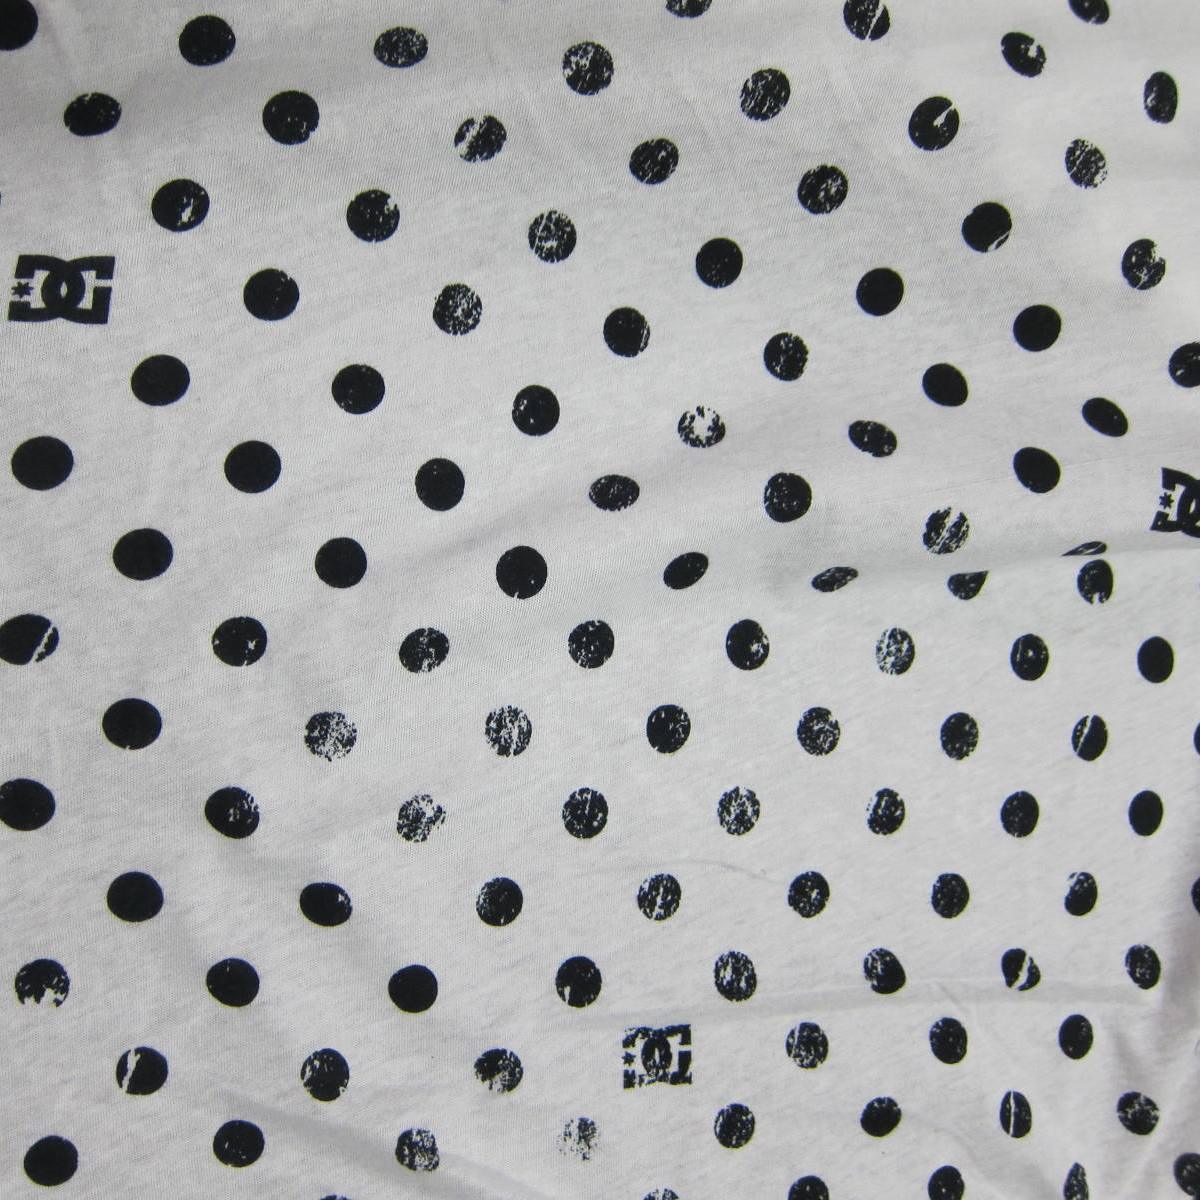 Distressed Black Dots on White Cotton/Poly Jersey